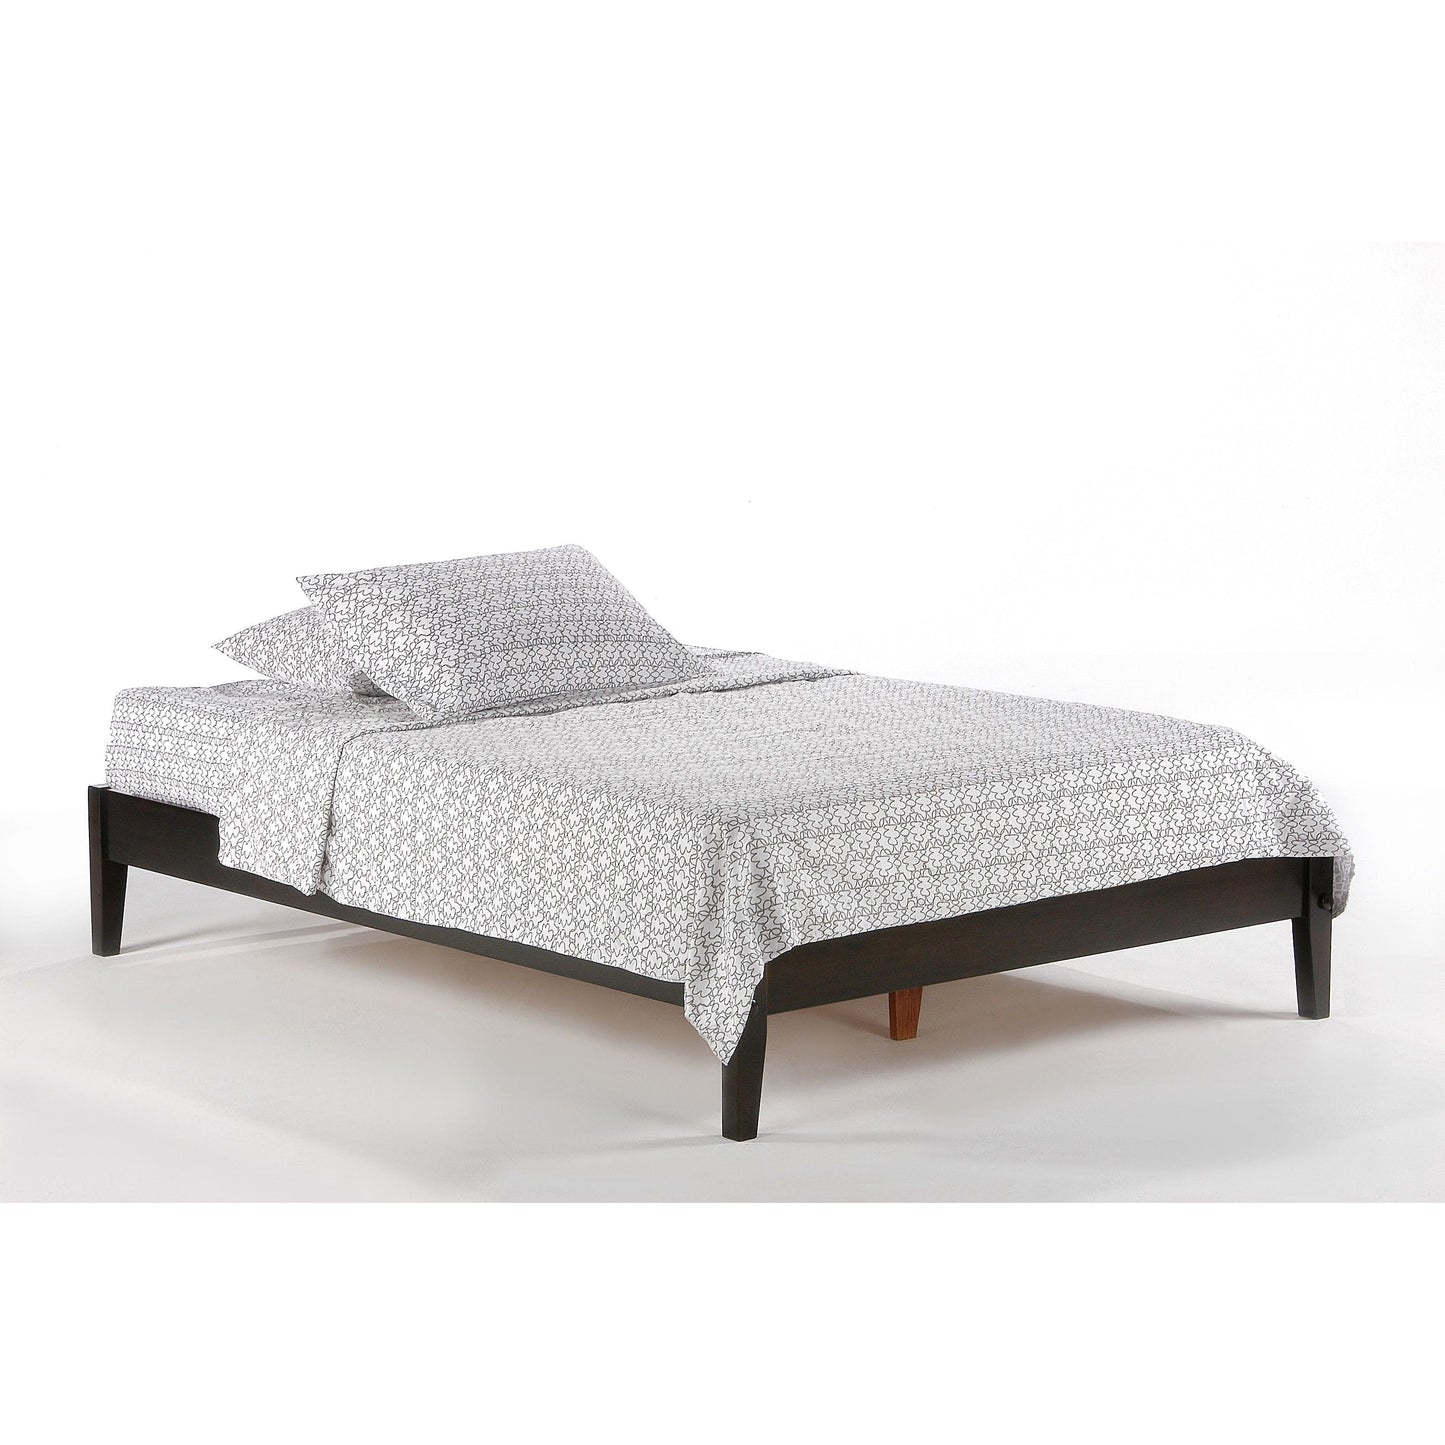 Night And Day Basic California King Platform Bed in cherry finish (P Series) BAS-CKG-COM-P-CH